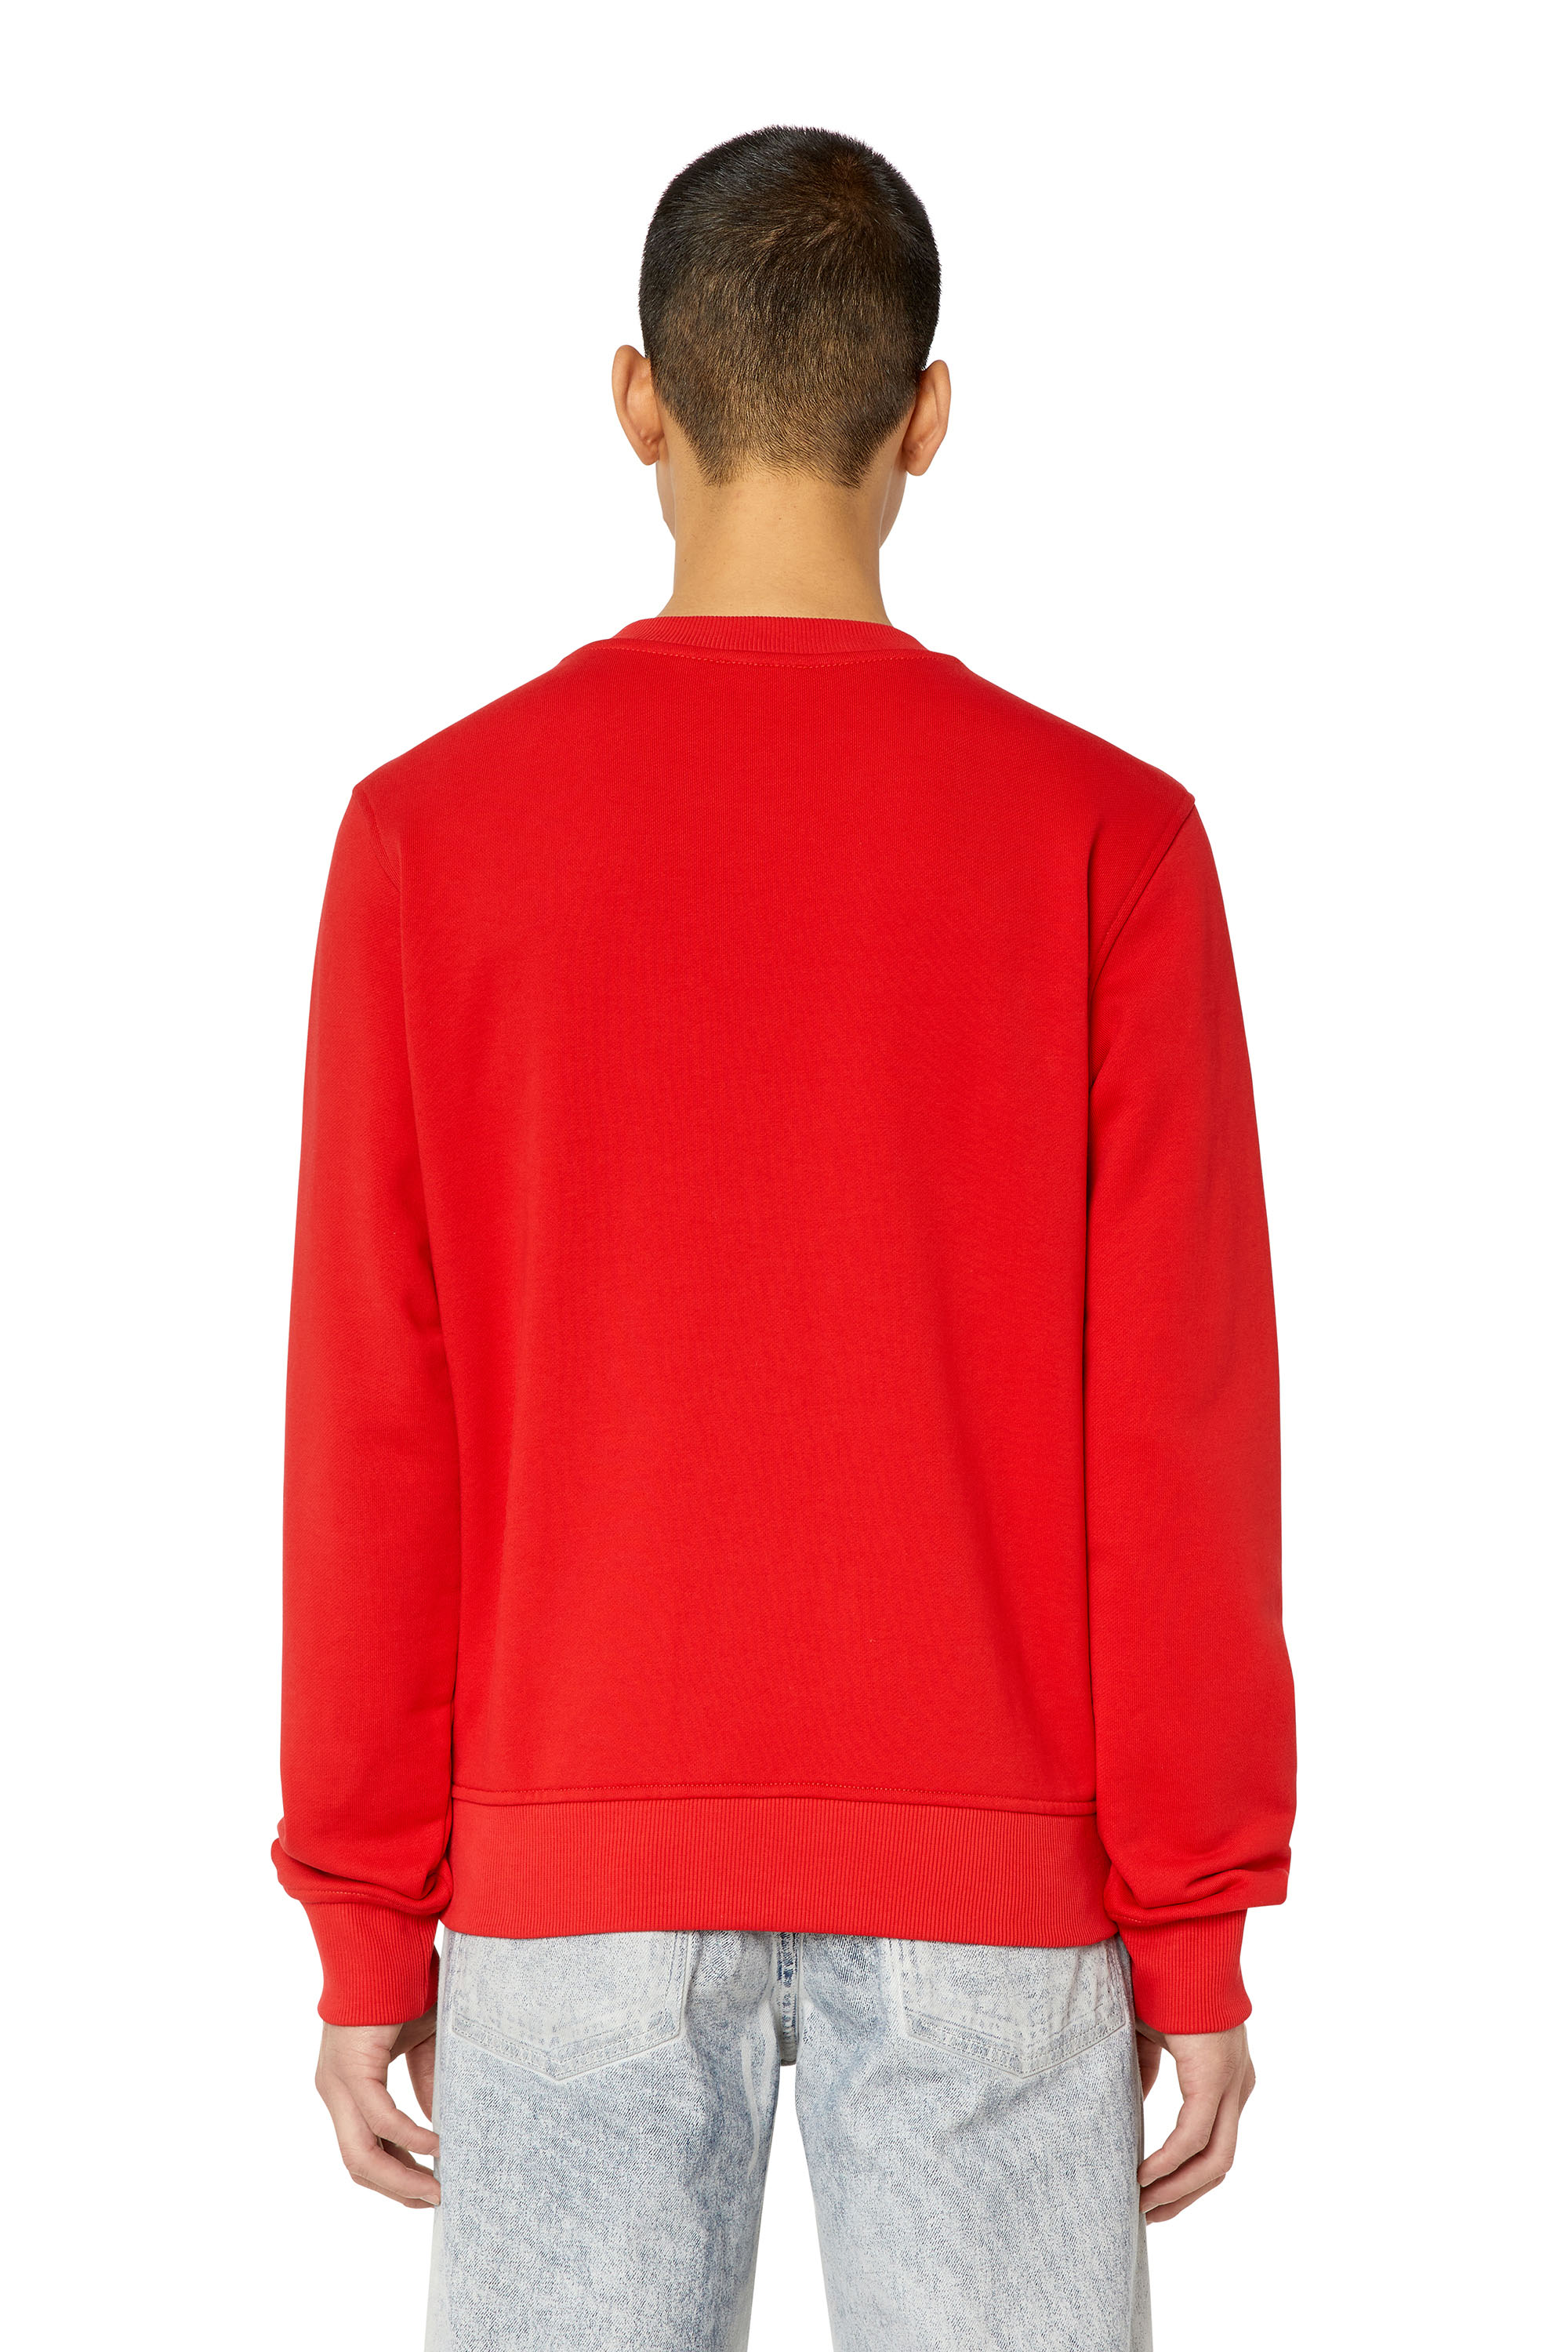 Diesel - S-GINN-D, Unisex Sweatshirt with mini D patch in Red - Image 3